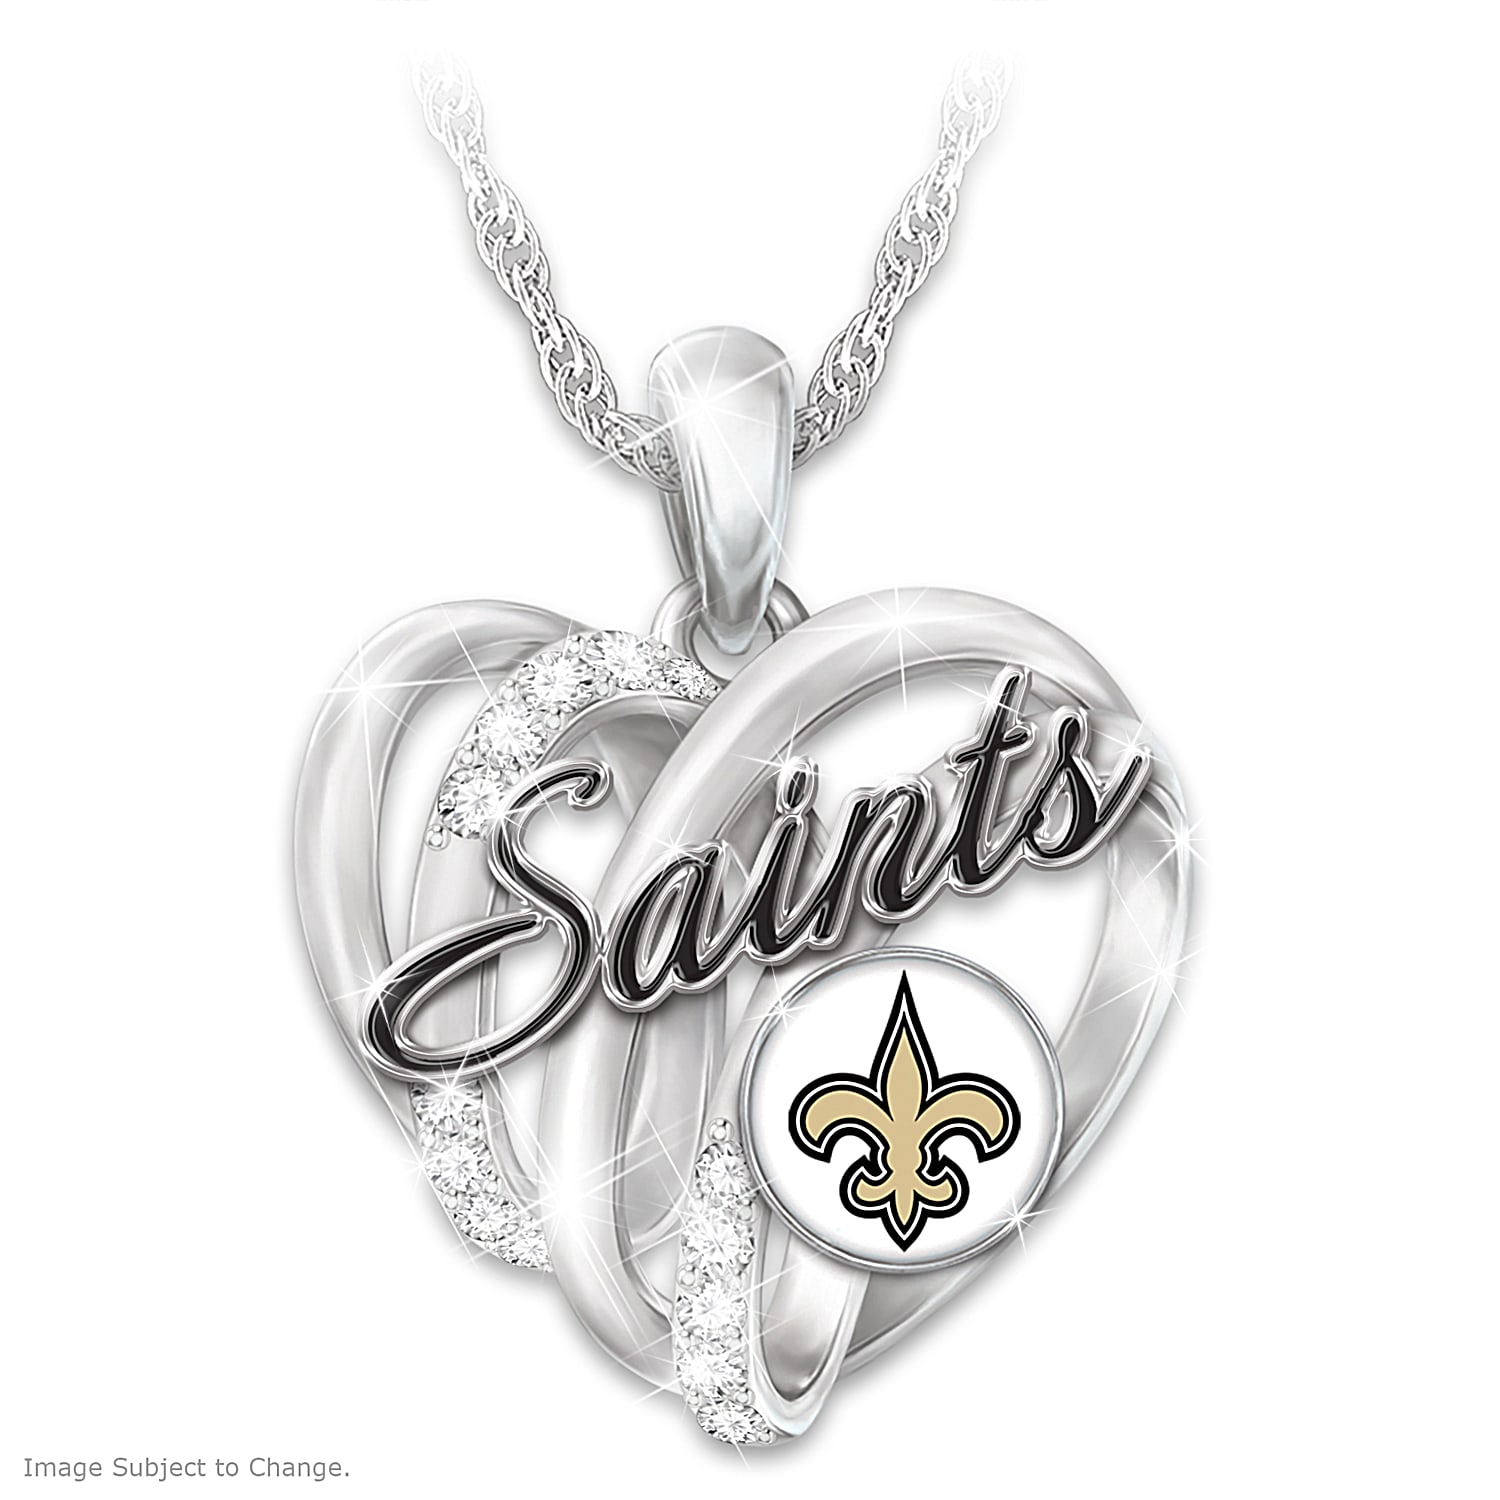 New Orleans Saints Written On My Heart NFL Sterling Silver-Plated Pendant  Necklace Featuring A Heart With Team Name And Adorned With Crystal Accents